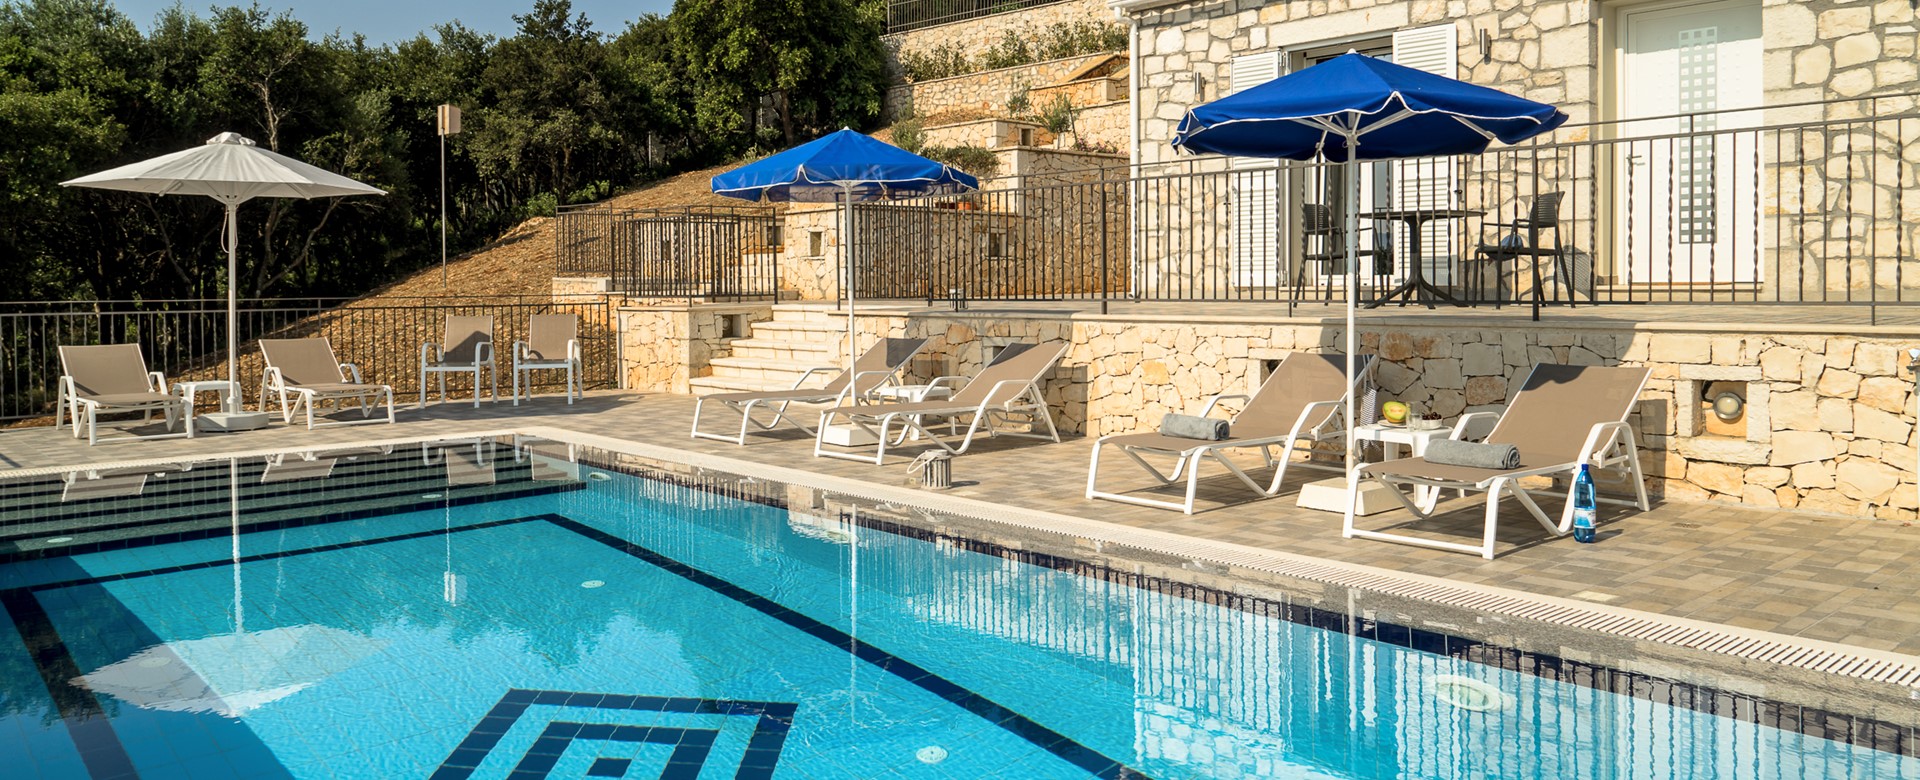 Family friendly poolside setting with loungers and umbrellas at Villa Gionis Fiscardo, Kefalonia, Greek Islands